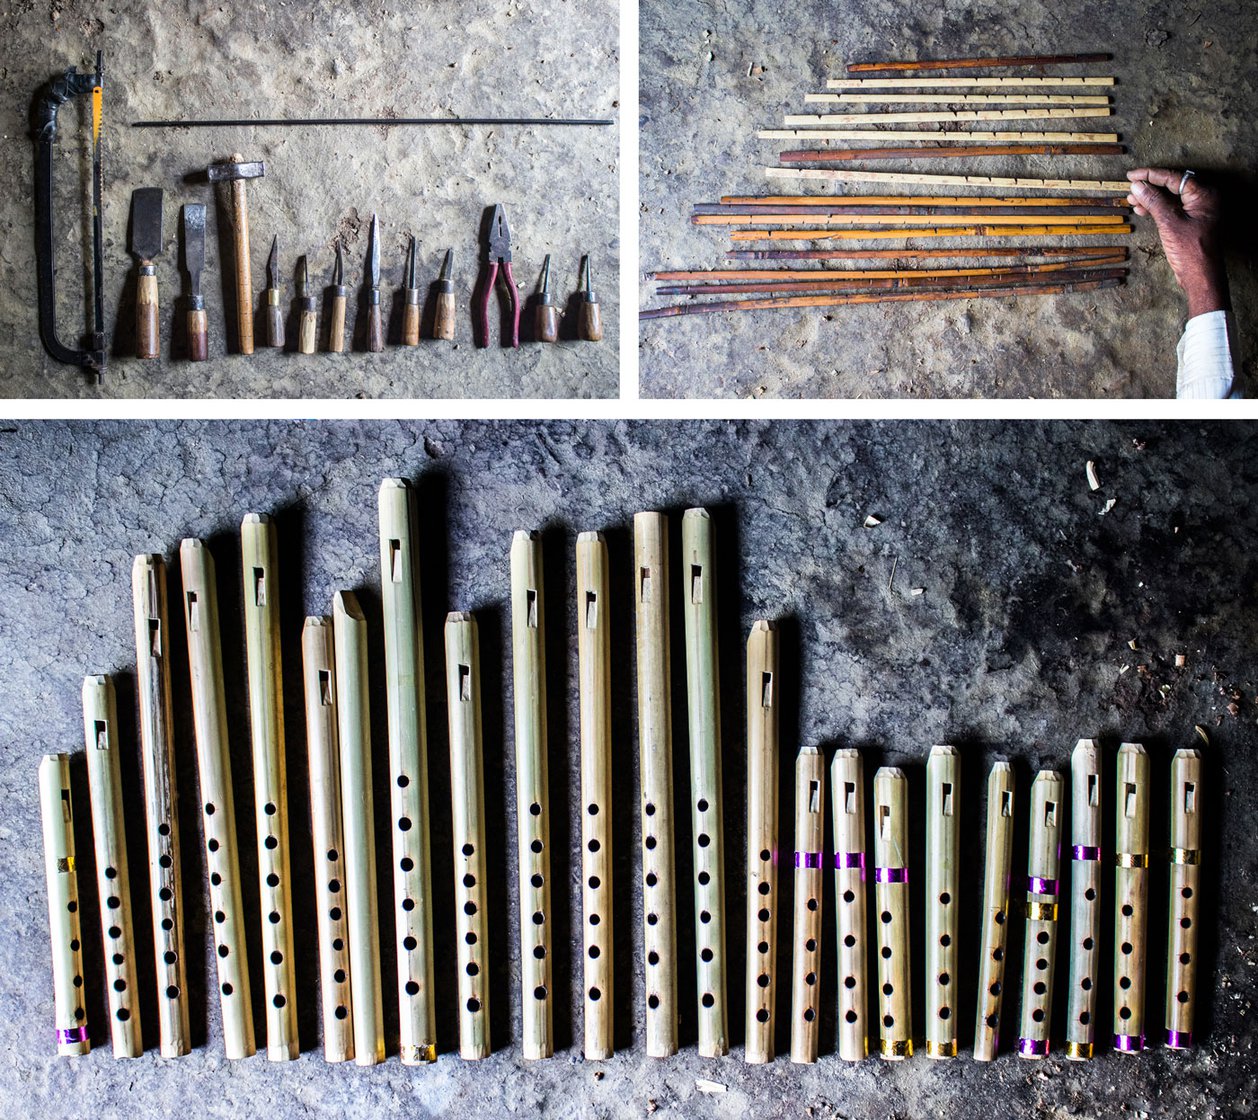 Top left: The flute-makers toolkit with (left-to-right) a hacksaw blade, two types of patli, hatodi, three types of chaku (knives) a cleaning chaku, two varieties of masudichi aari, pakad, two aari for making holes, and the metal rod on top is the gaz. Top right: The tone holes on a flute are made using these sticks which have marks for measurements. Bottom: Dinkar Aiwale has spent over 1.5 lakh hours perfecting his craft and now takes less than an hour to make a flute